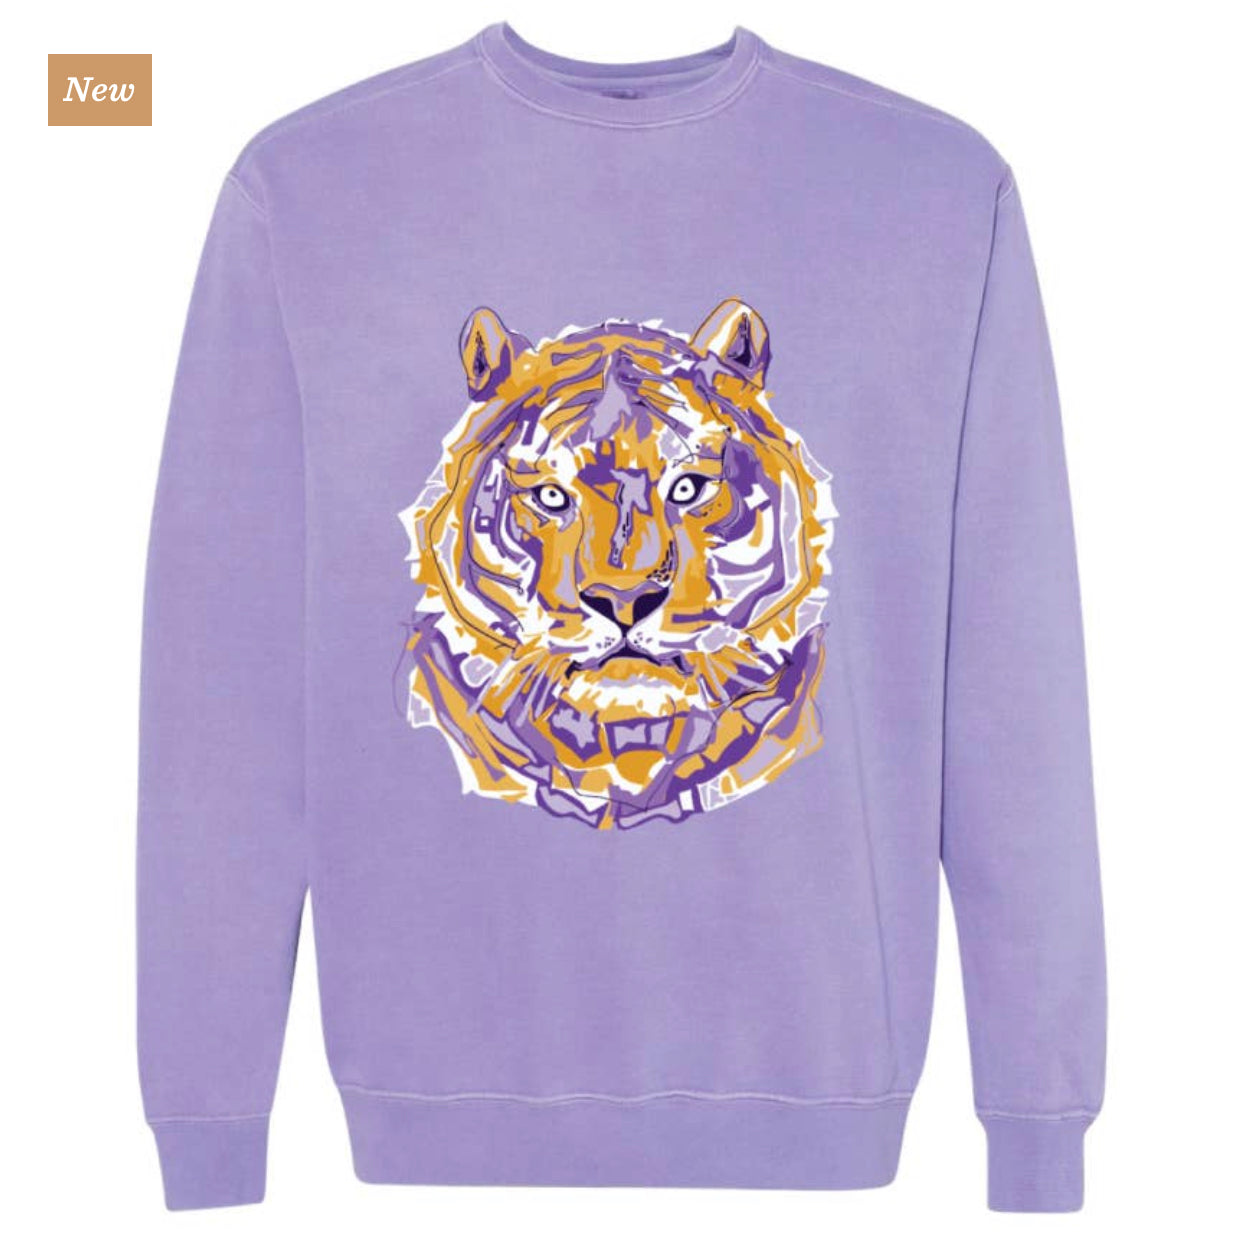 Purple long sleeve tee with a white, orange and purple layered tiger graphic